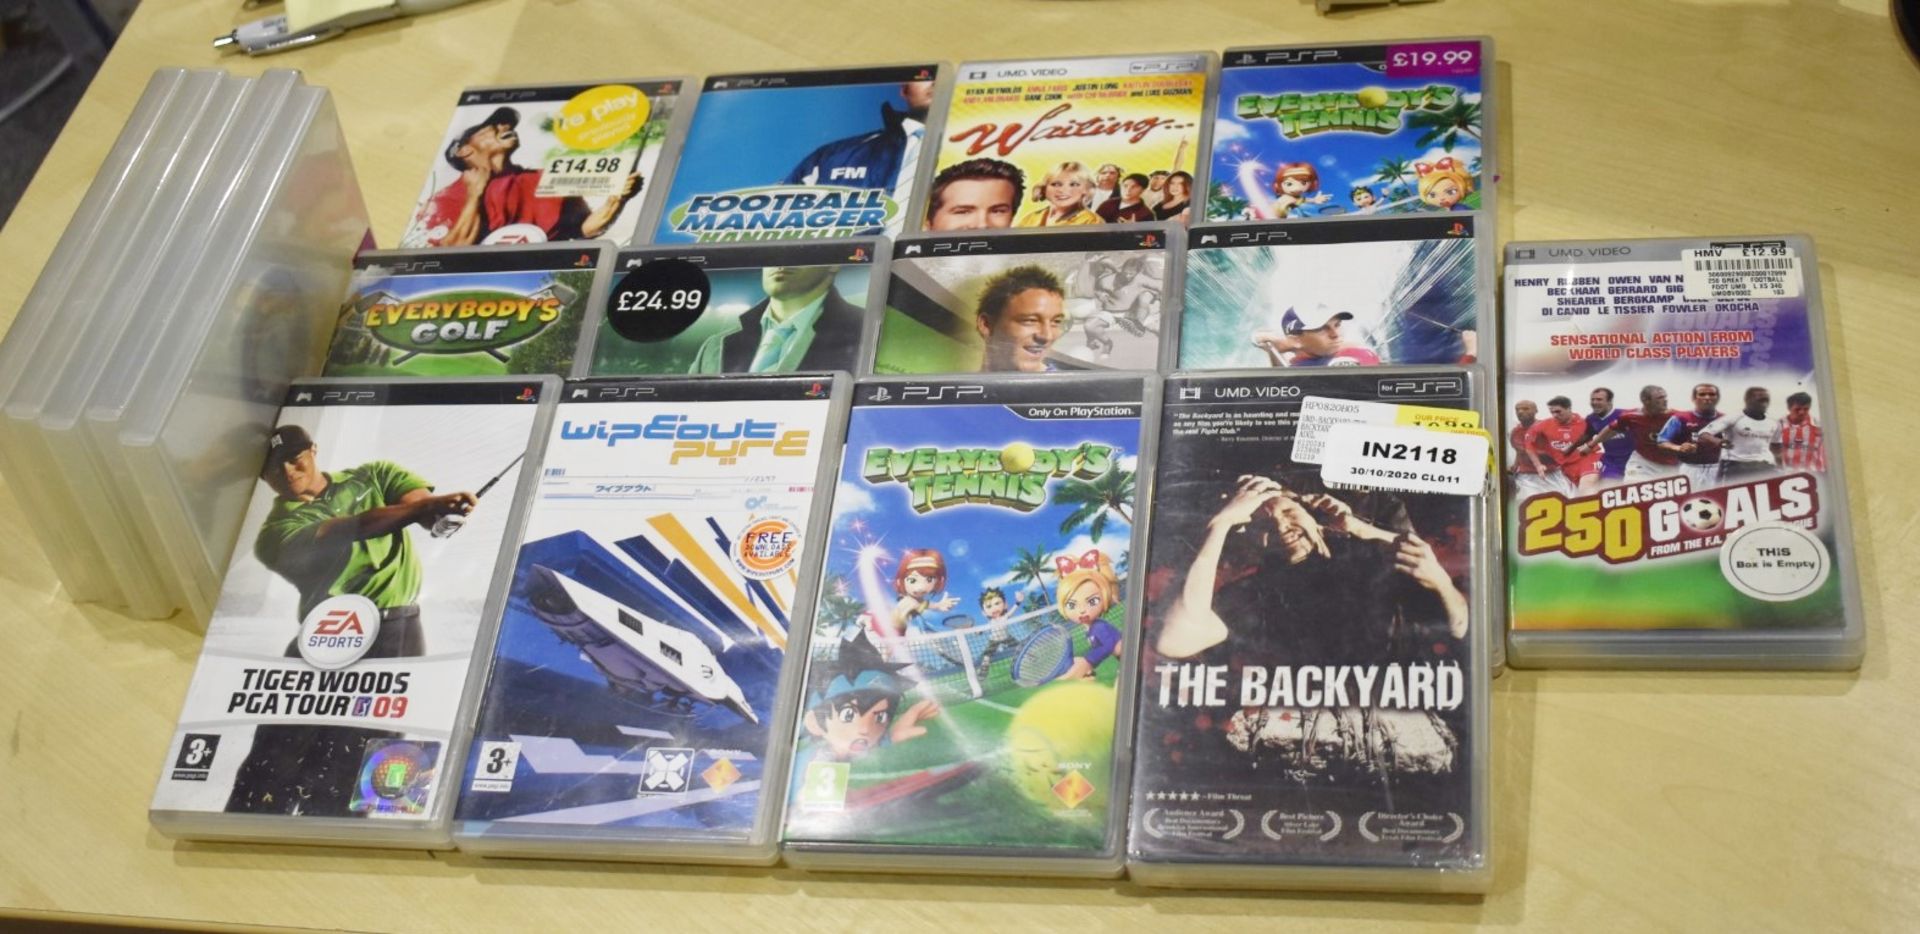 Assorted Lot of Sony PSP Handheld Games Console Games and Films - Includes 18 Games and Films Plus